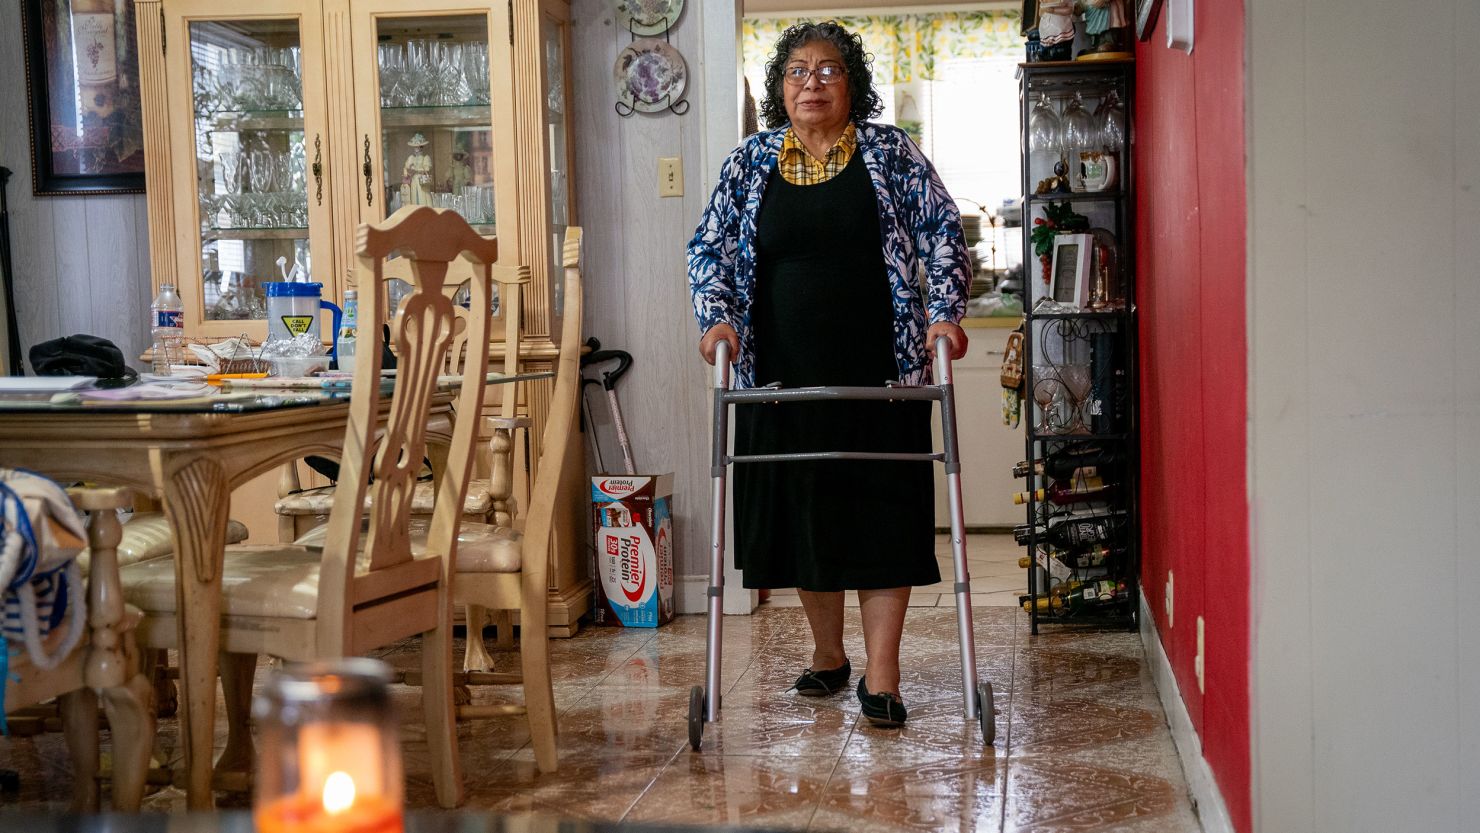 At the Kansas City Chiefs Super Bowl parade, Sarai Holguin heard what she thought were fireworks, unaware she had been shot. Holguin underwent surgery and doctors opted to leave the bullet in her leg. She’s now using a walker to get around.